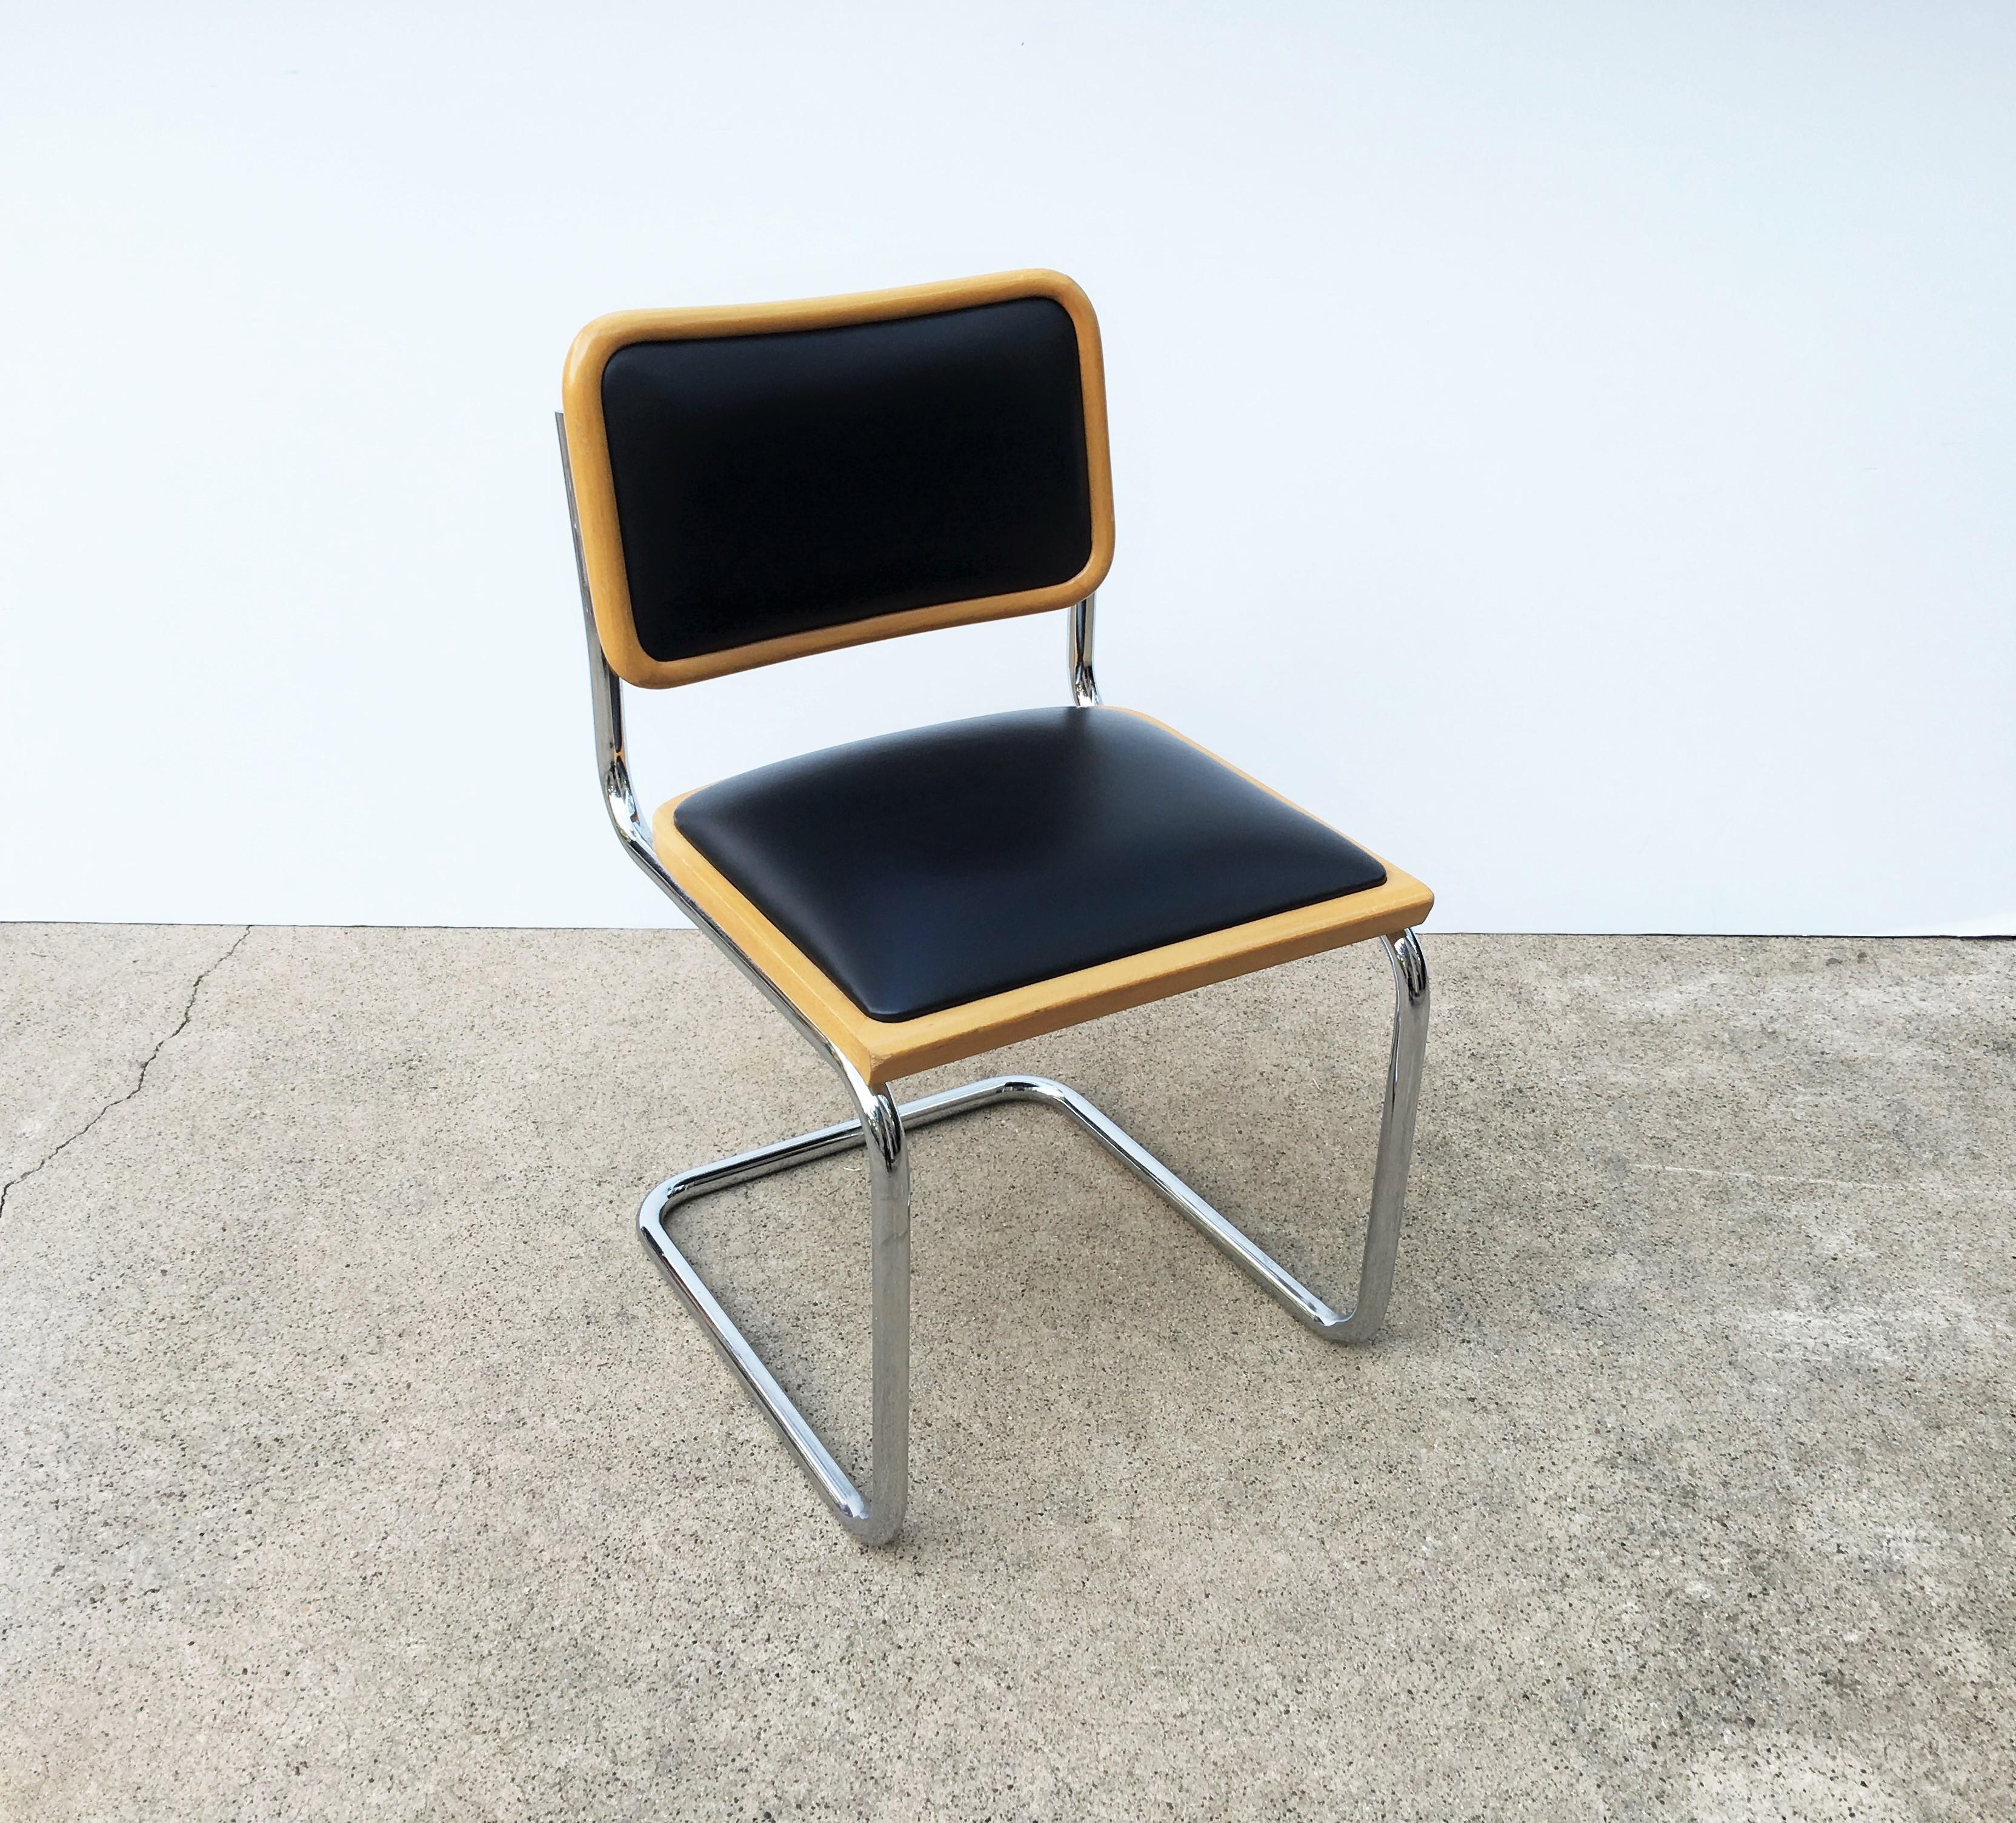 marcel breuer chair made in italy